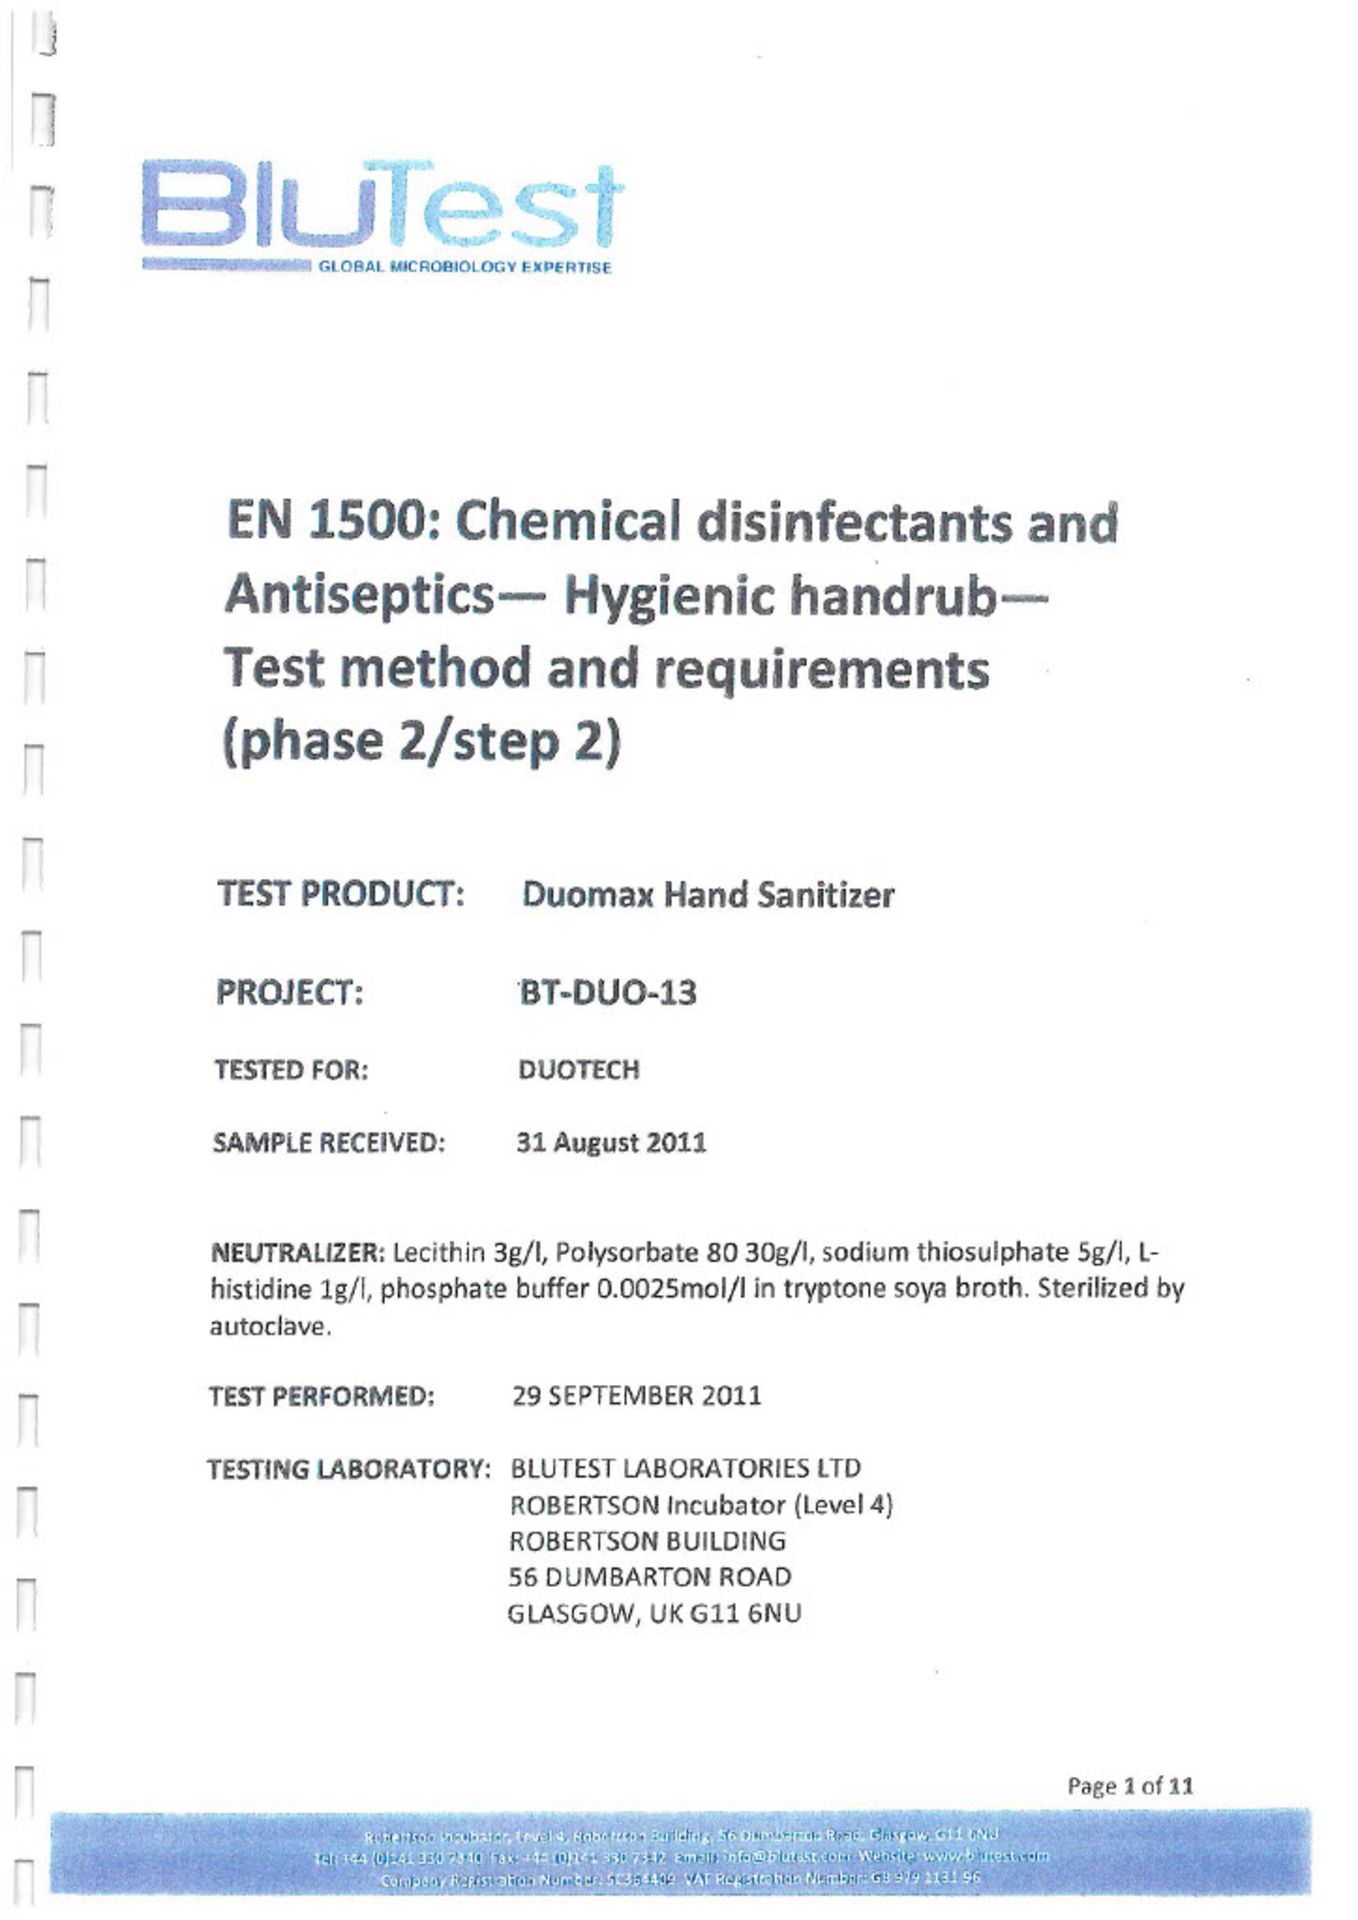 1000L IBC OF DUOMAX SUPER CONCENTRATED DISINFECTANT, MADE IN UK, MARCH 2020, ALL DOCUMENTS ATTACHED - Image 41 of 75